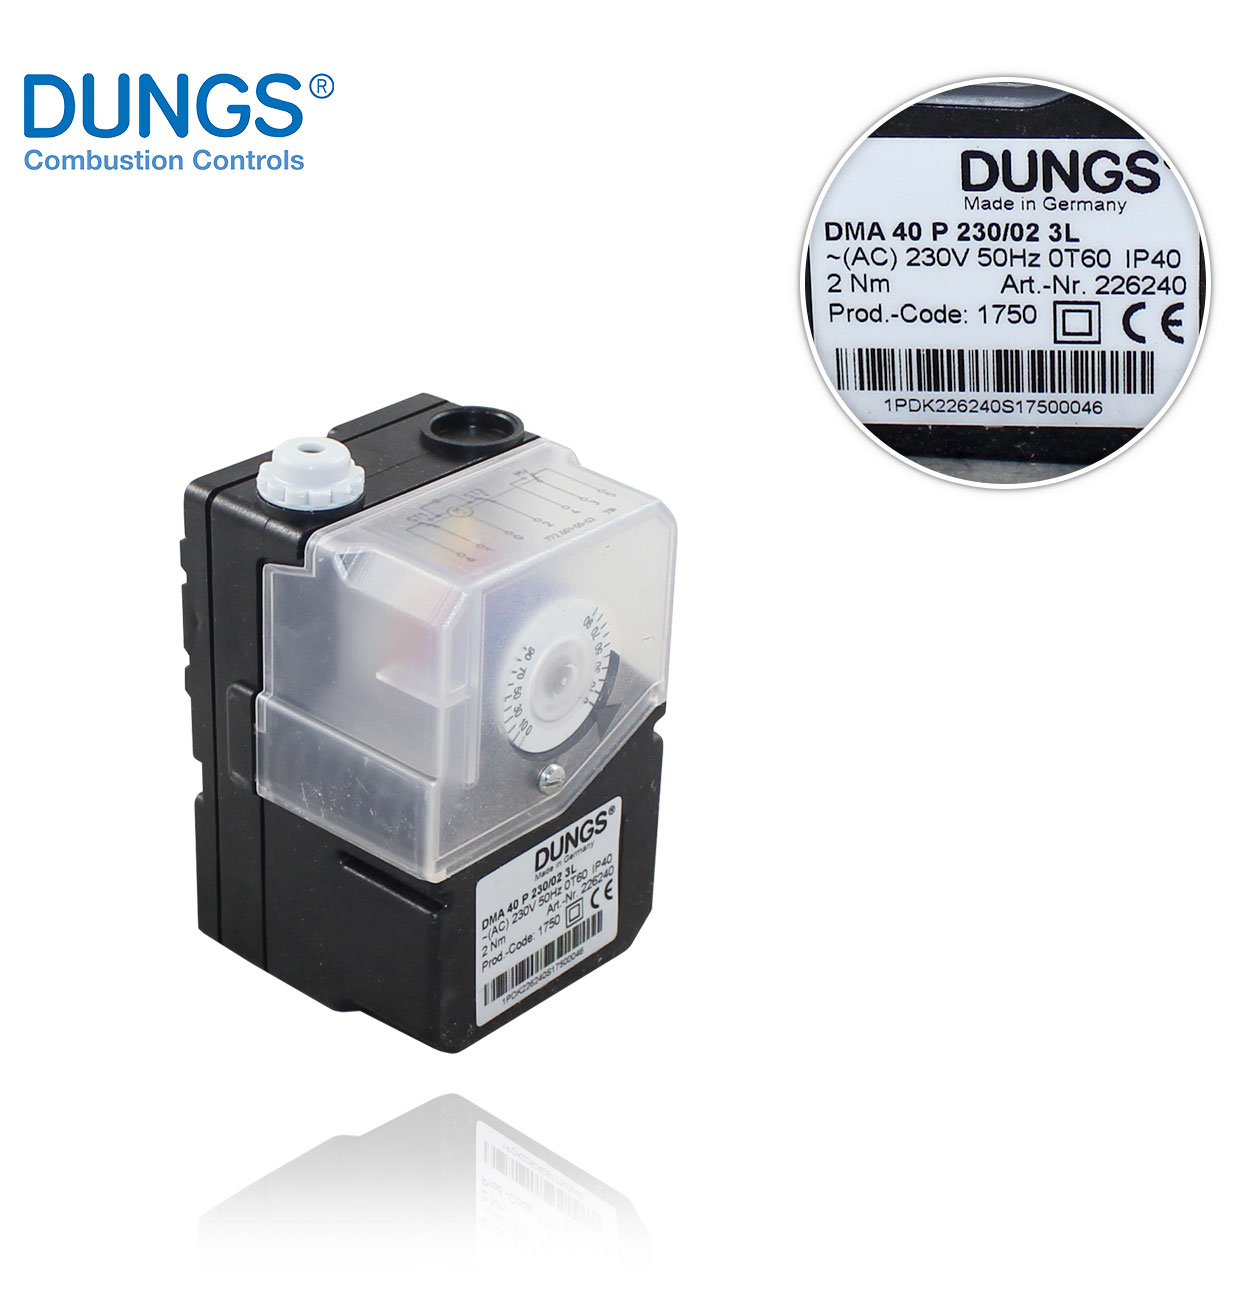 DMA 40 P 230/02  3L DUNGS SERVOMOTOR, 3 MICRO SWITCHES